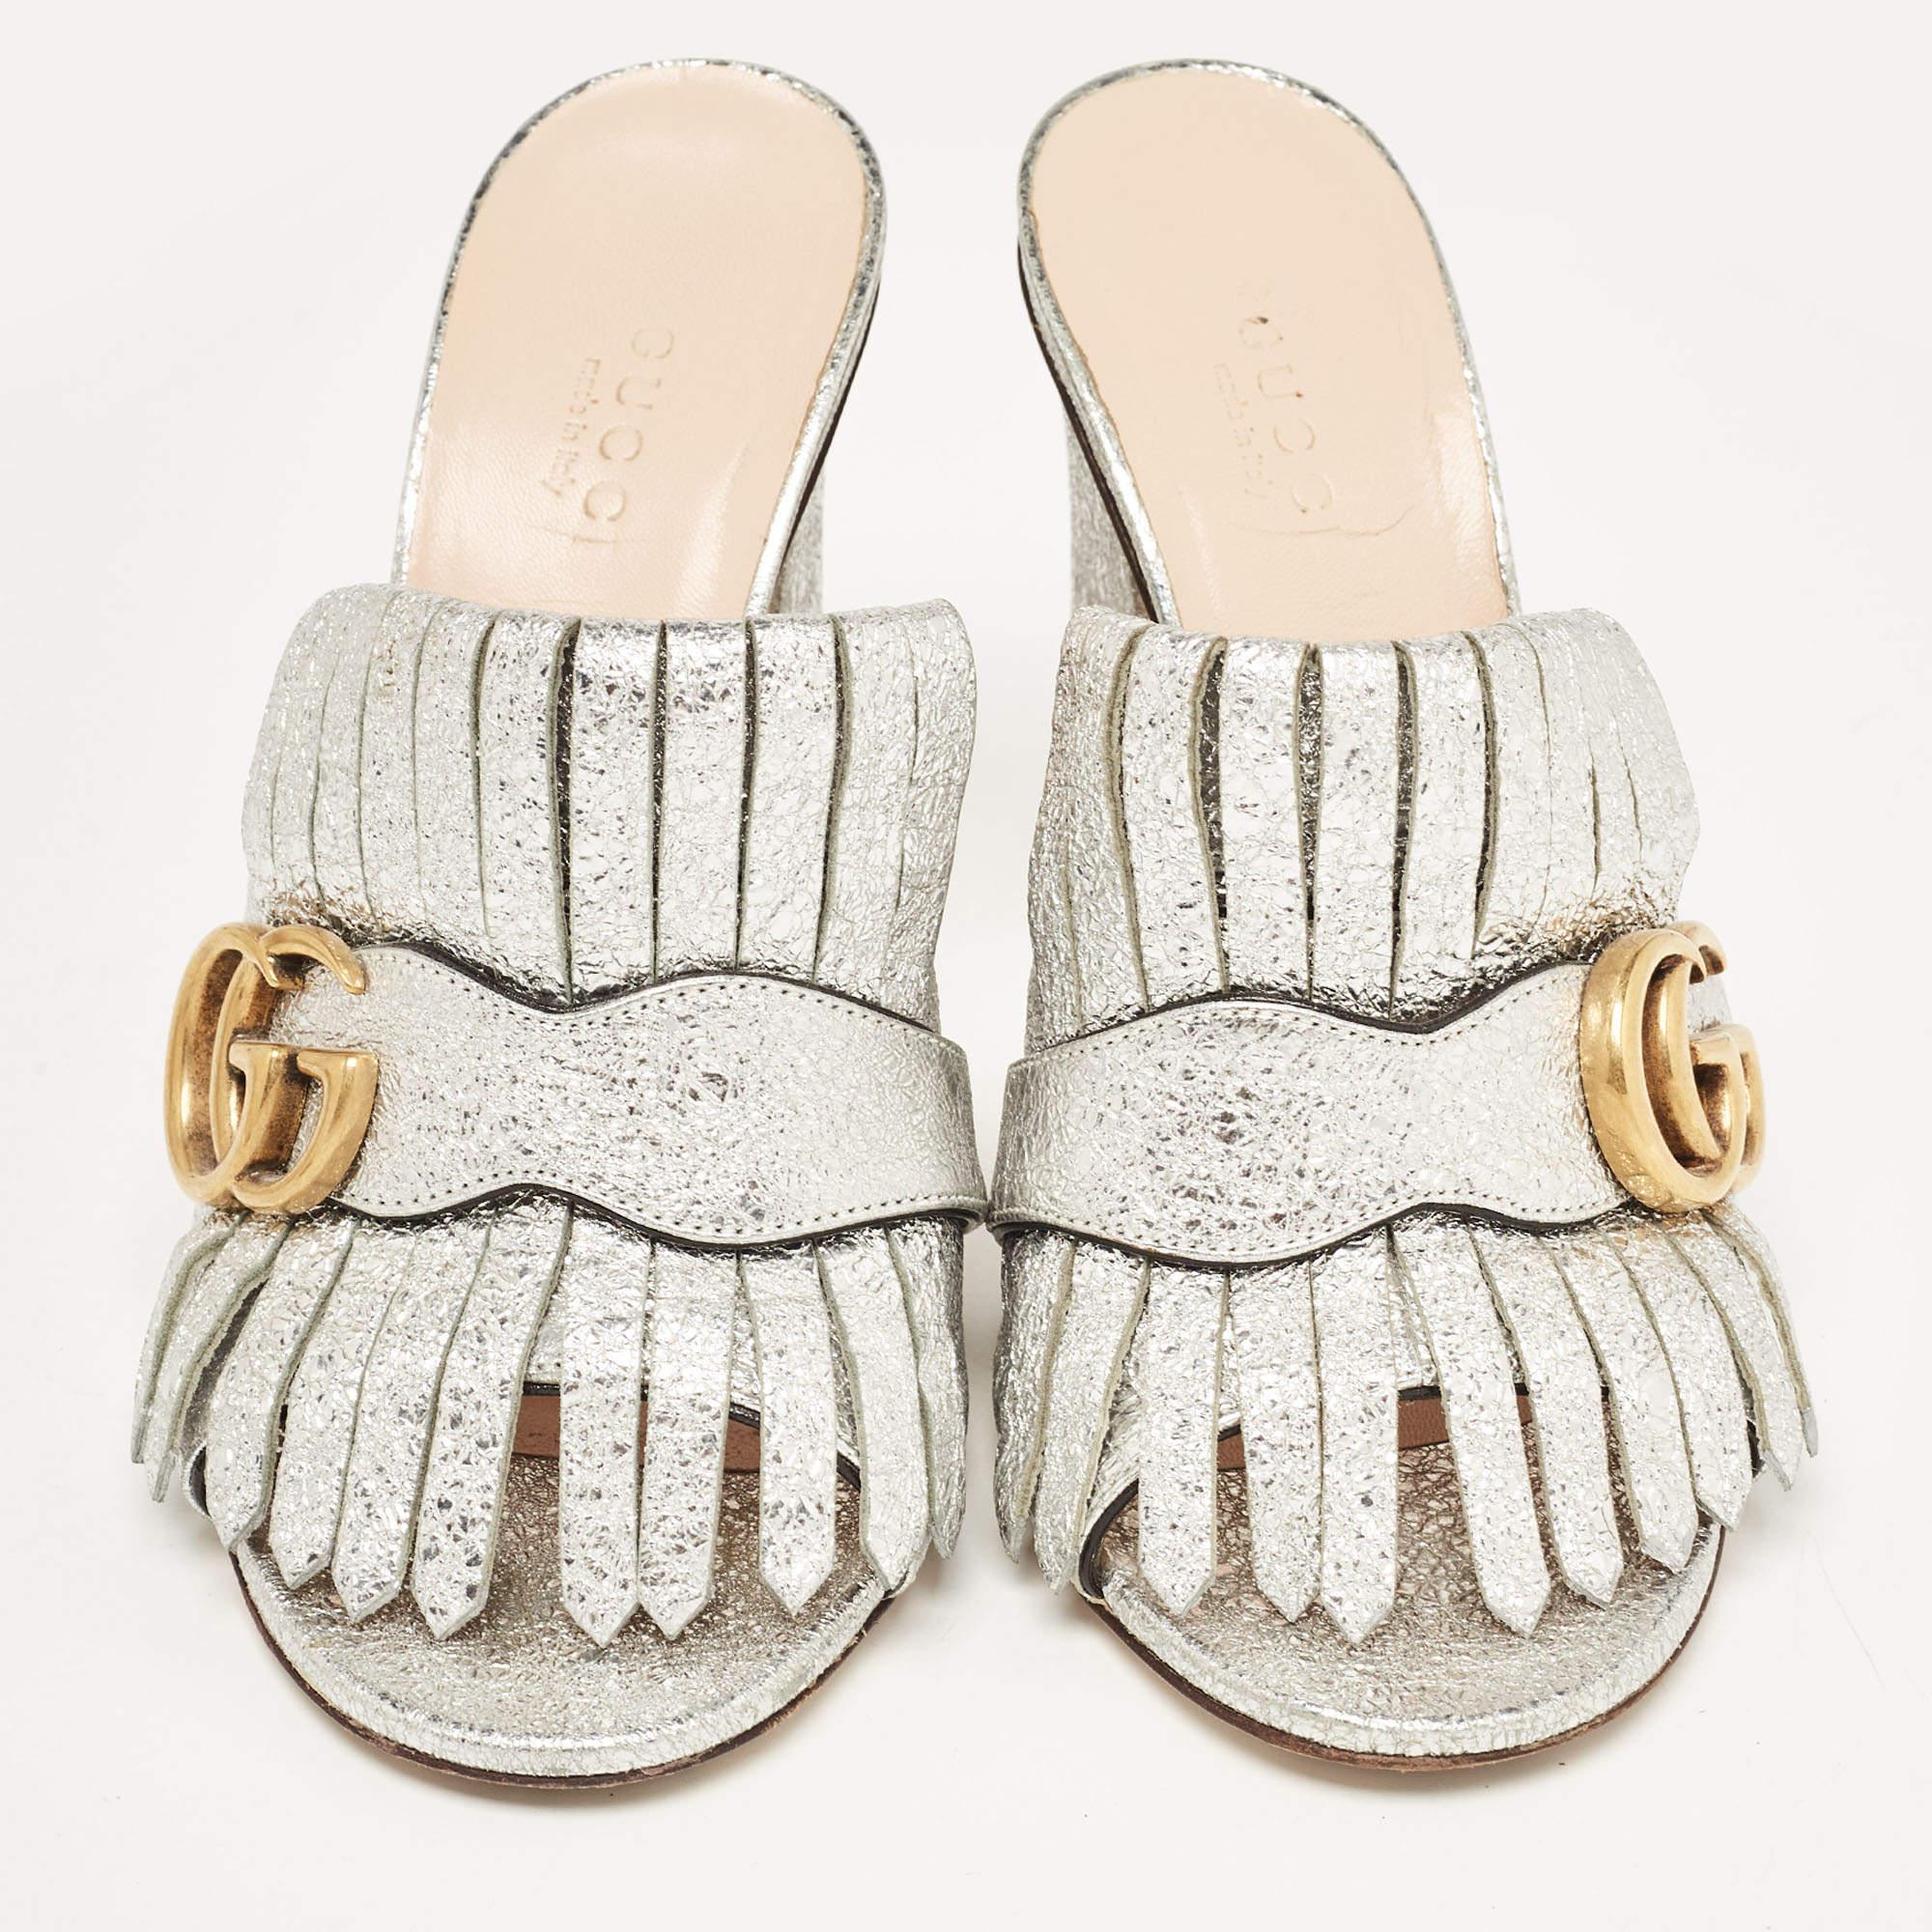 Gucci presents us with an impeccable creation that will make your style stand out. These GG Marmont sandals from Gucci are crafted using silver crackle leather with fringed detailing and a gold-toned GG motif attached to the vamps. They are